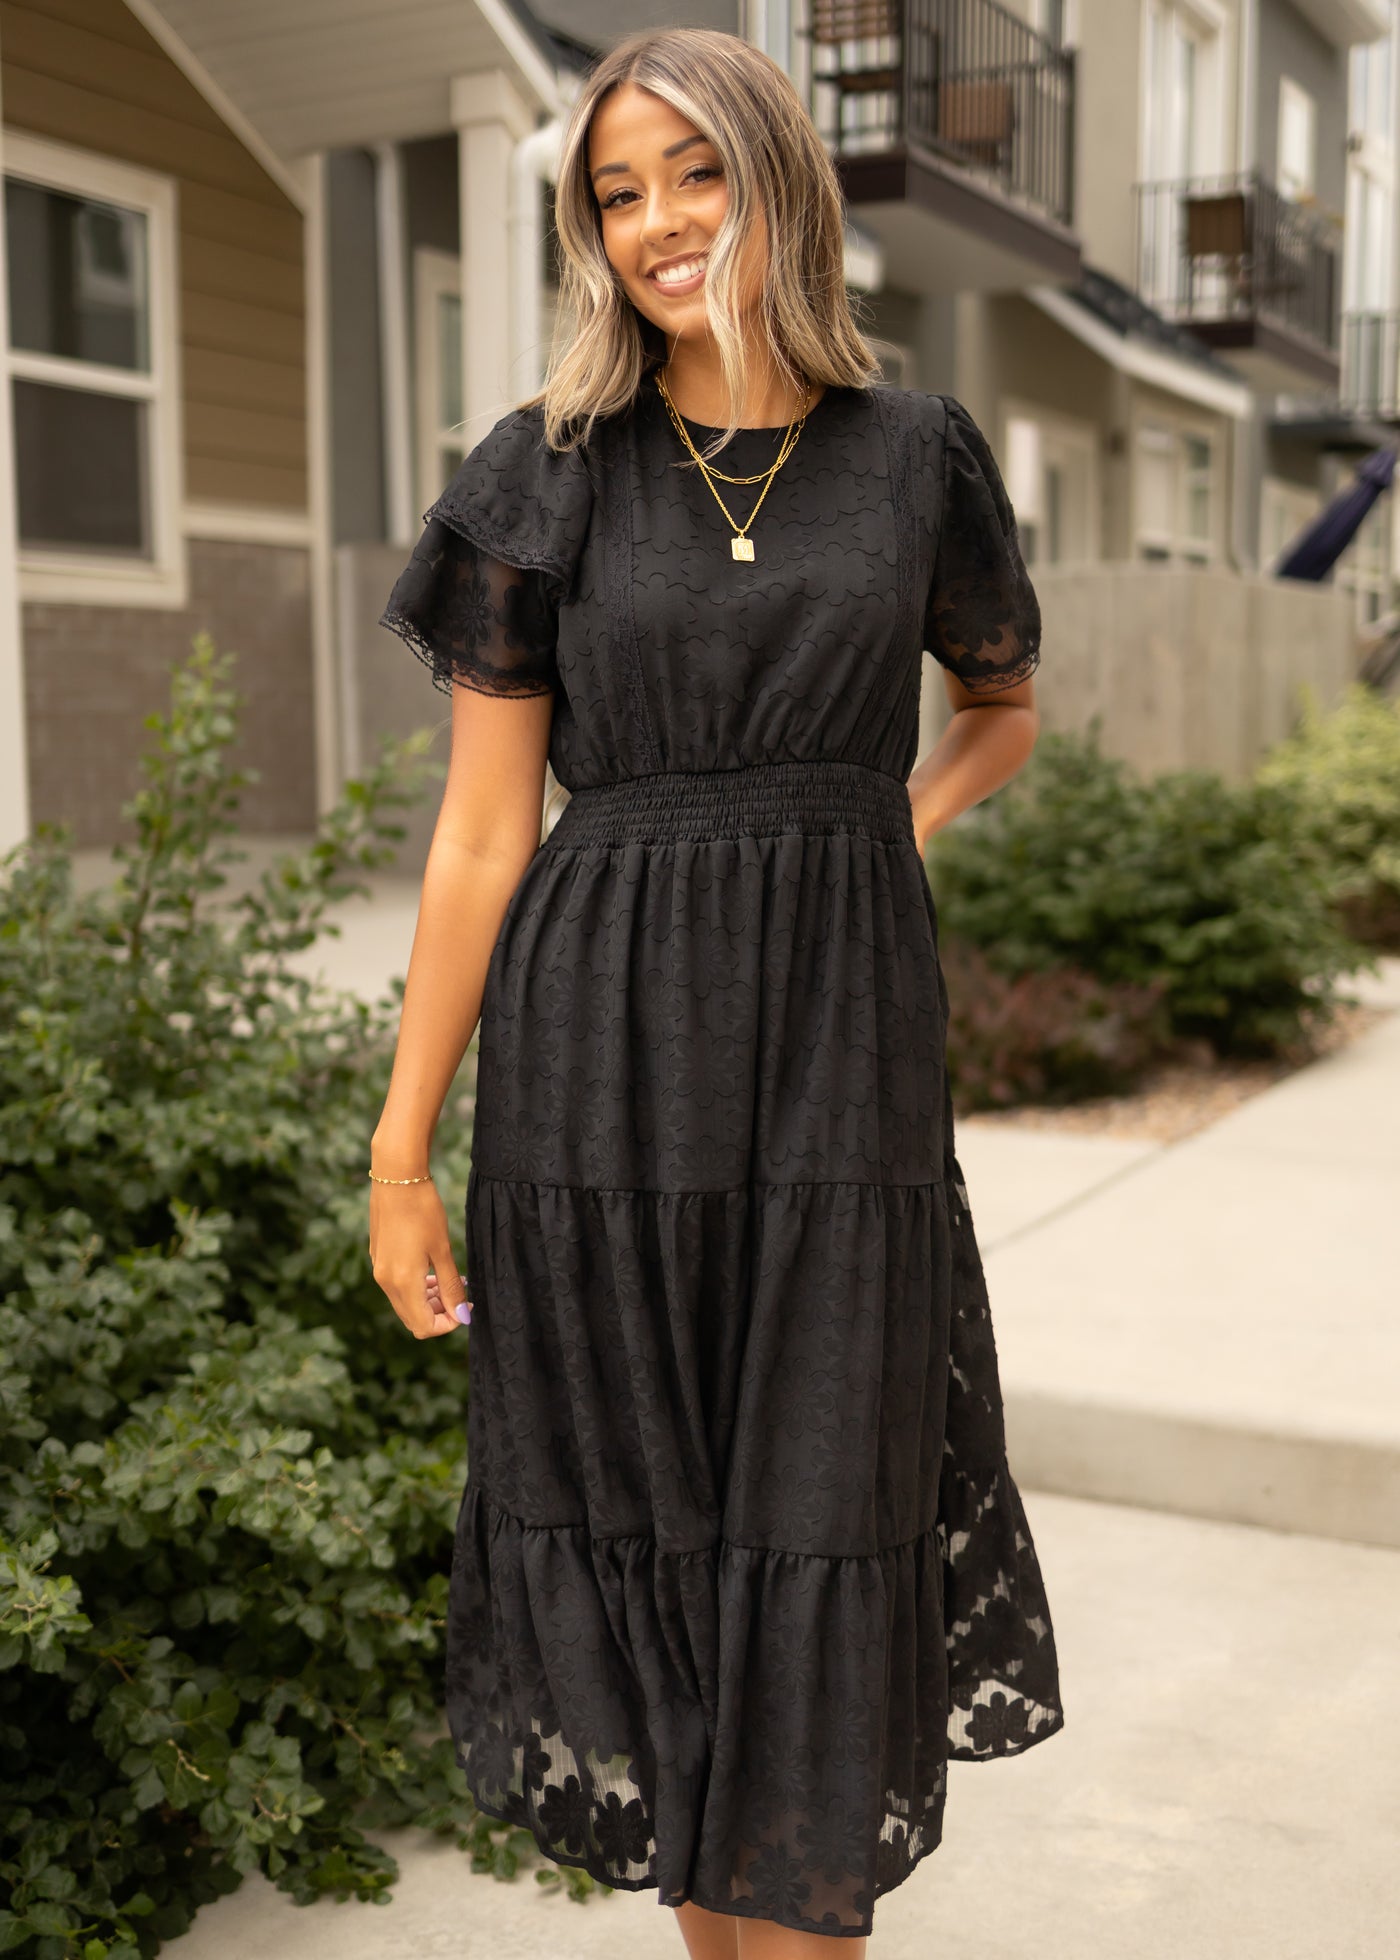 Short sleeve black floral dress with short sleeves and tiered skirt